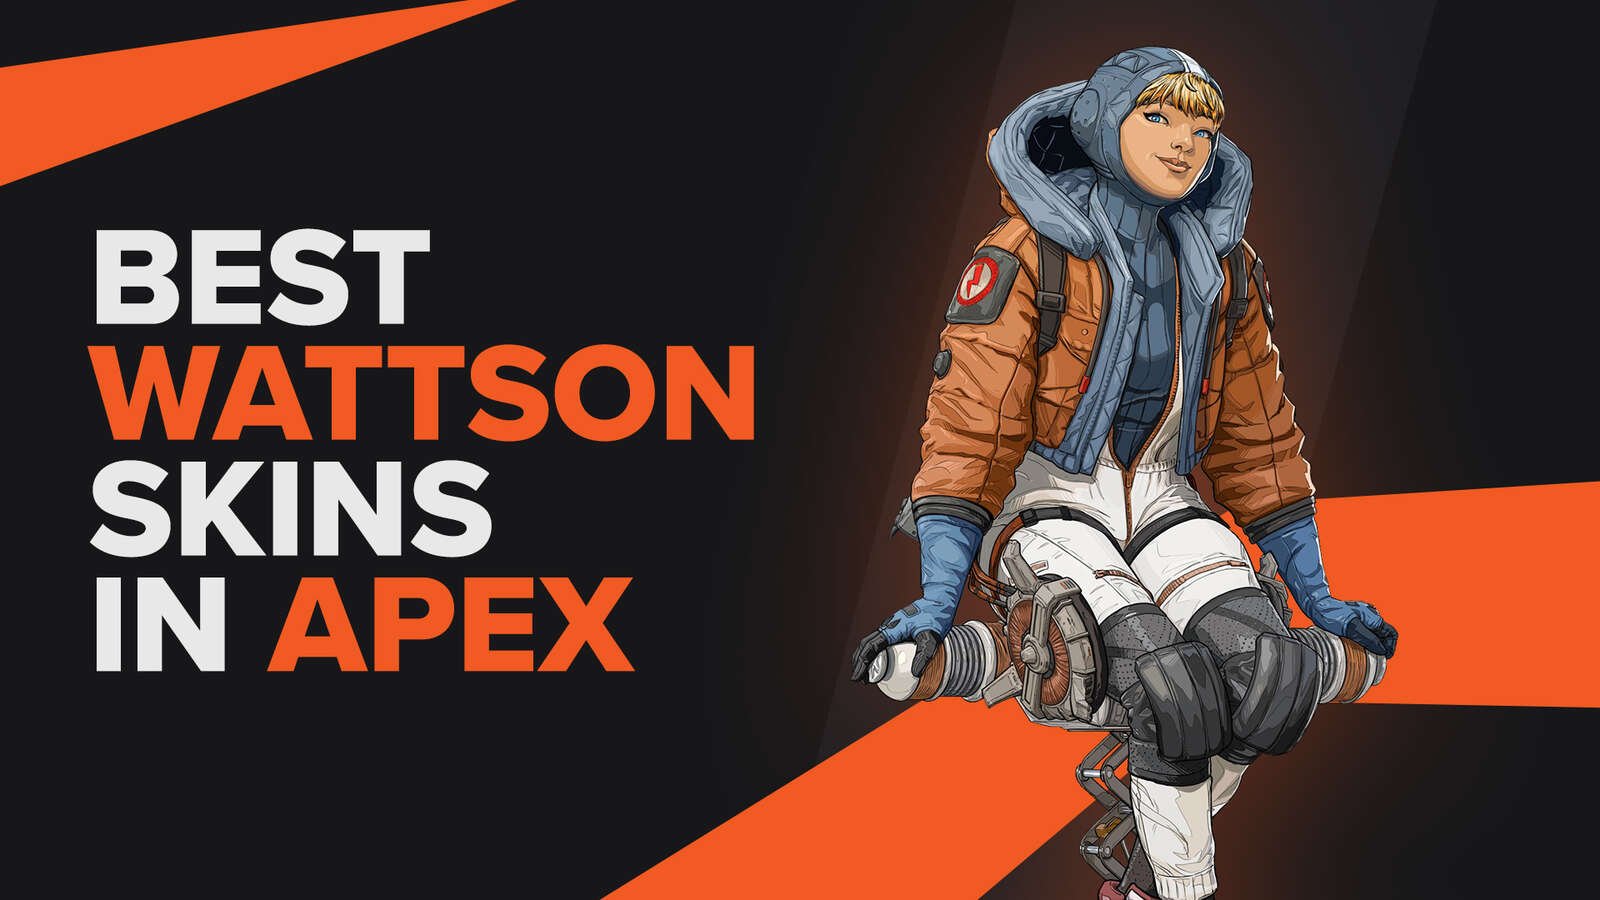 The Best Wattson Skins in Apex Legends That Make You Stand Out!